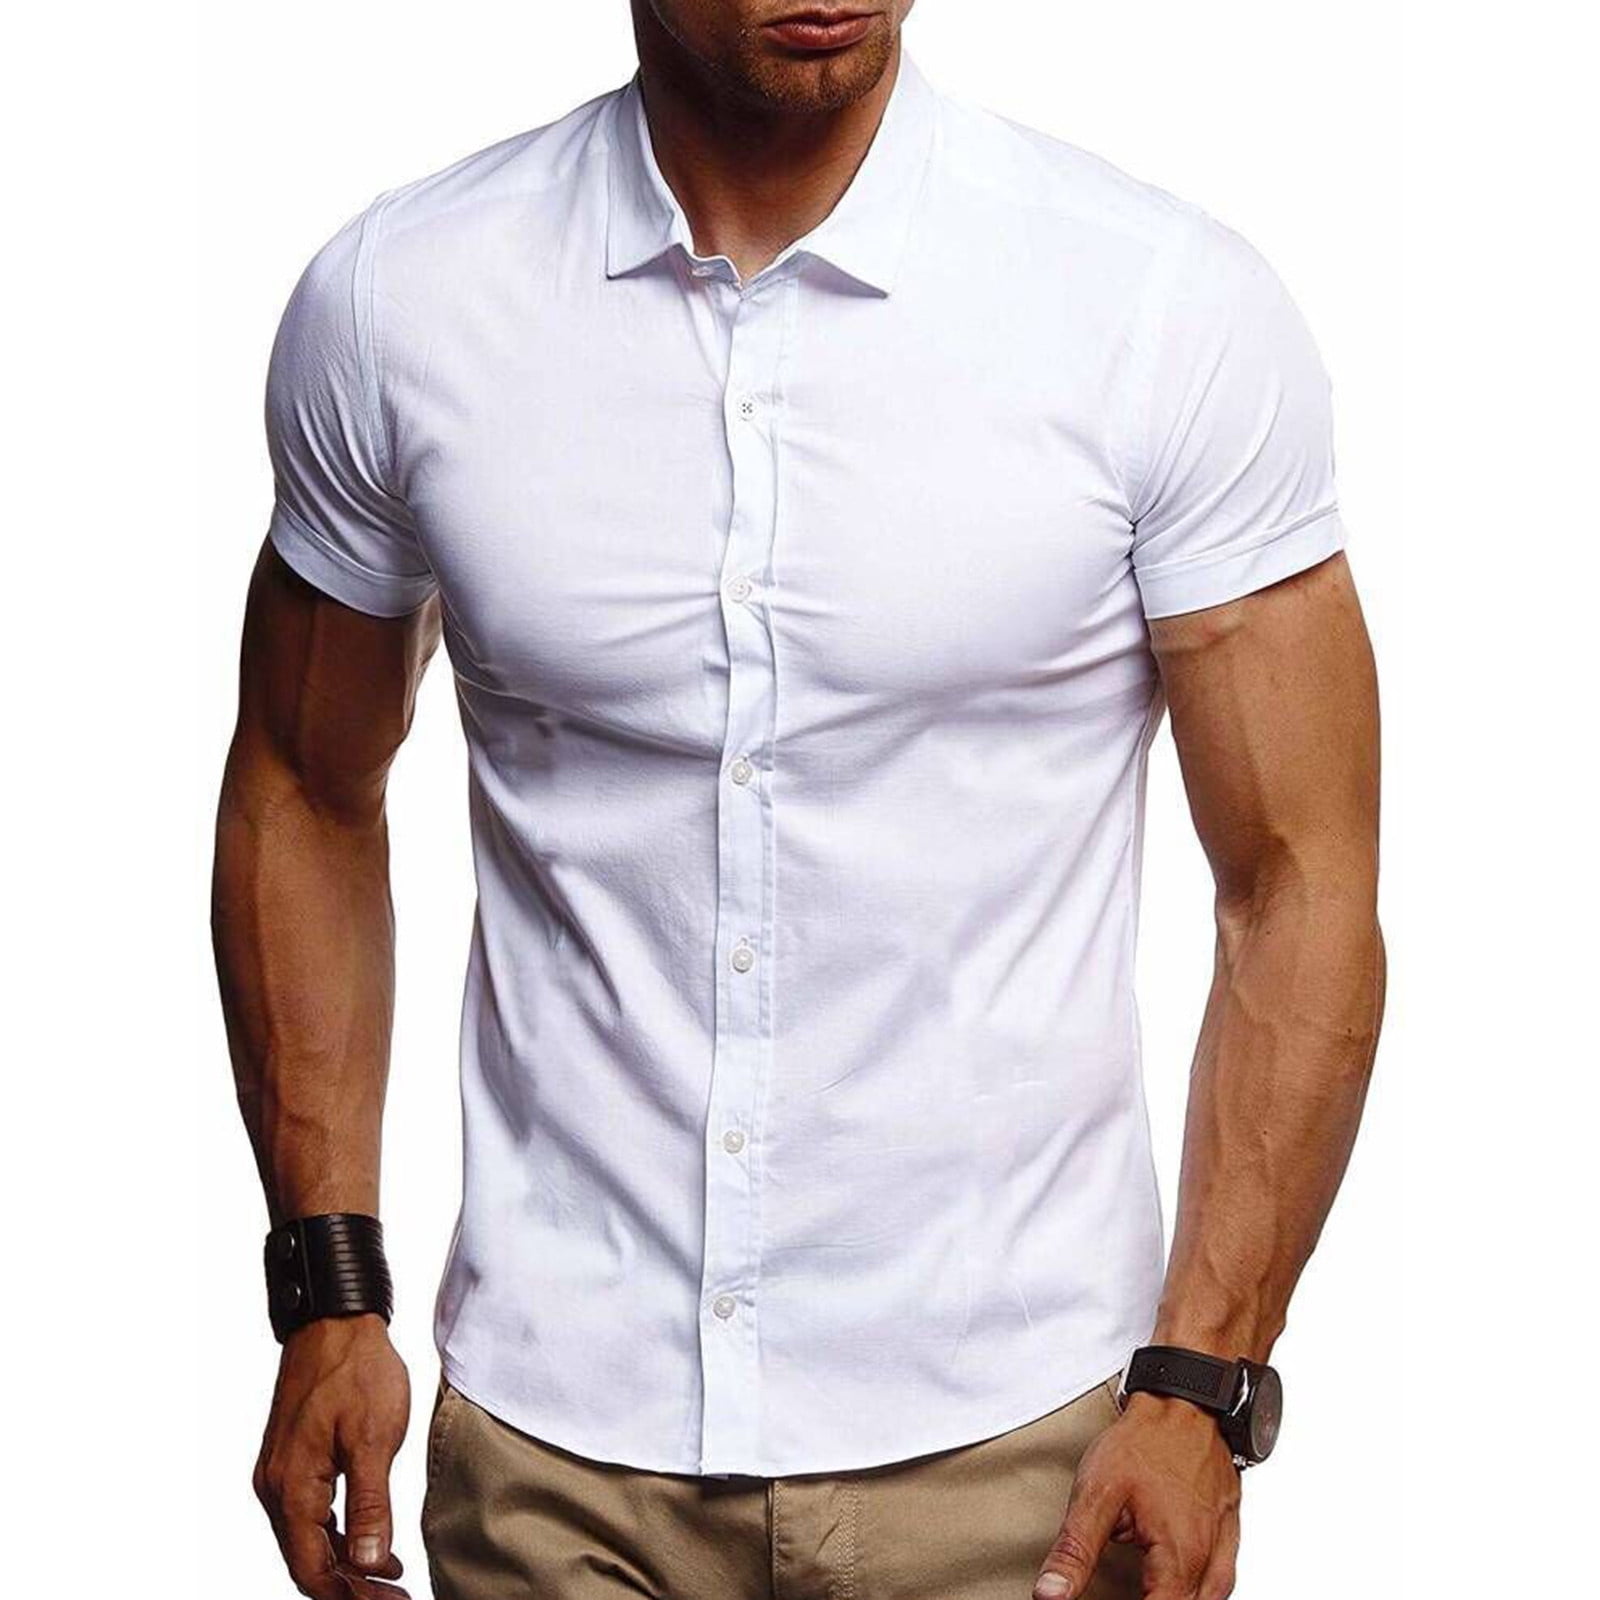 White Men'S T-Shirts Men'S Casual Business Affairs Solid Short Sleeve ...